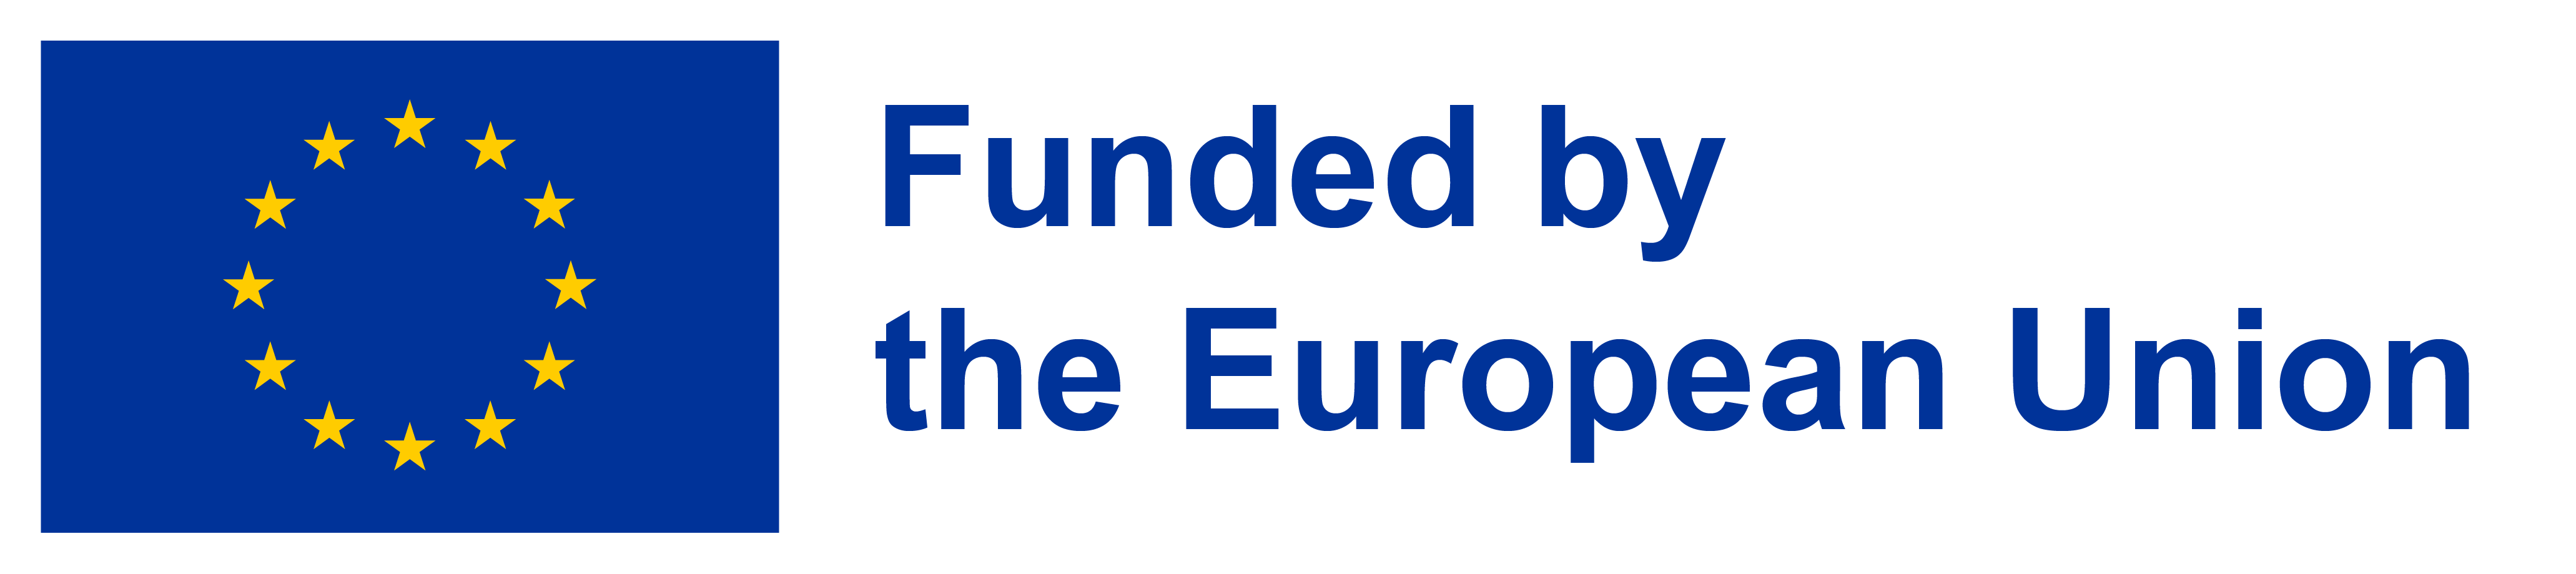 Funded by the European Union -logo